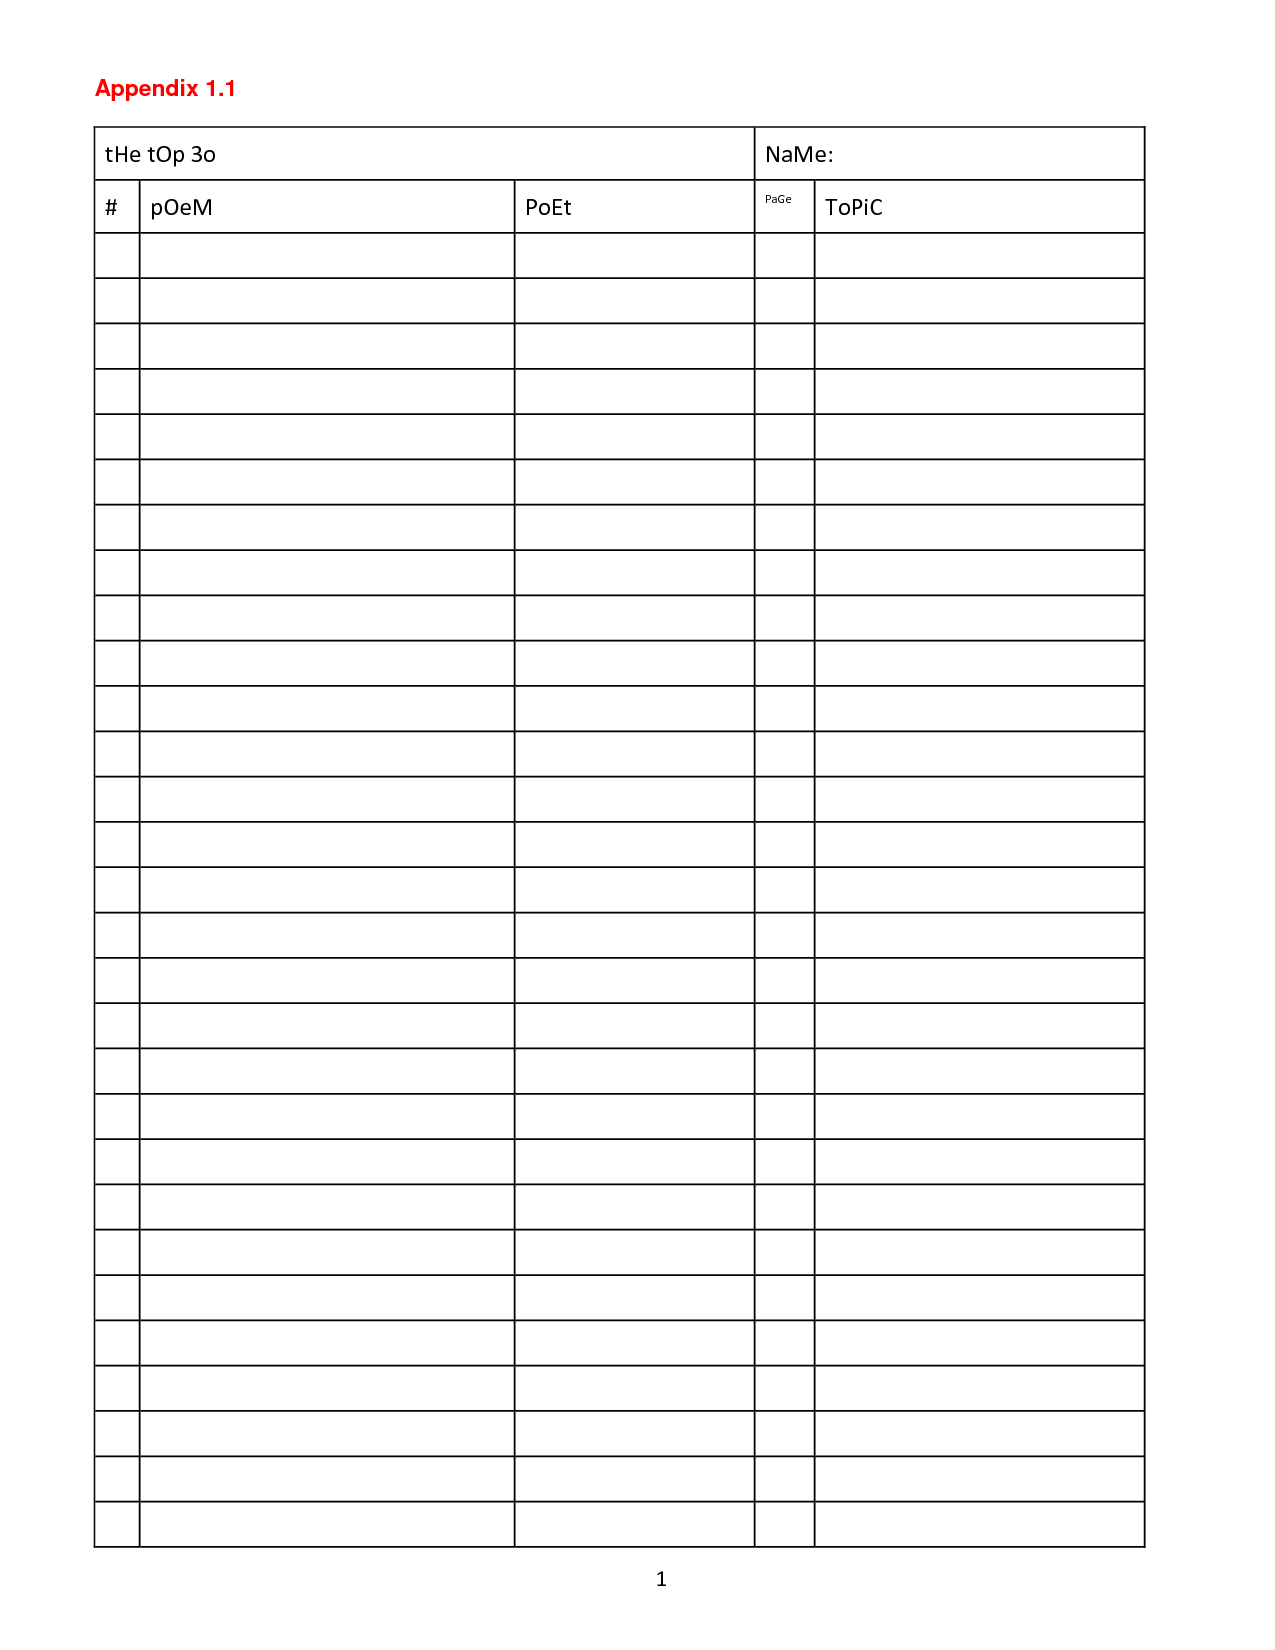 printable blank charts with columns - Video Search Engine at Search.com1275 x 1650